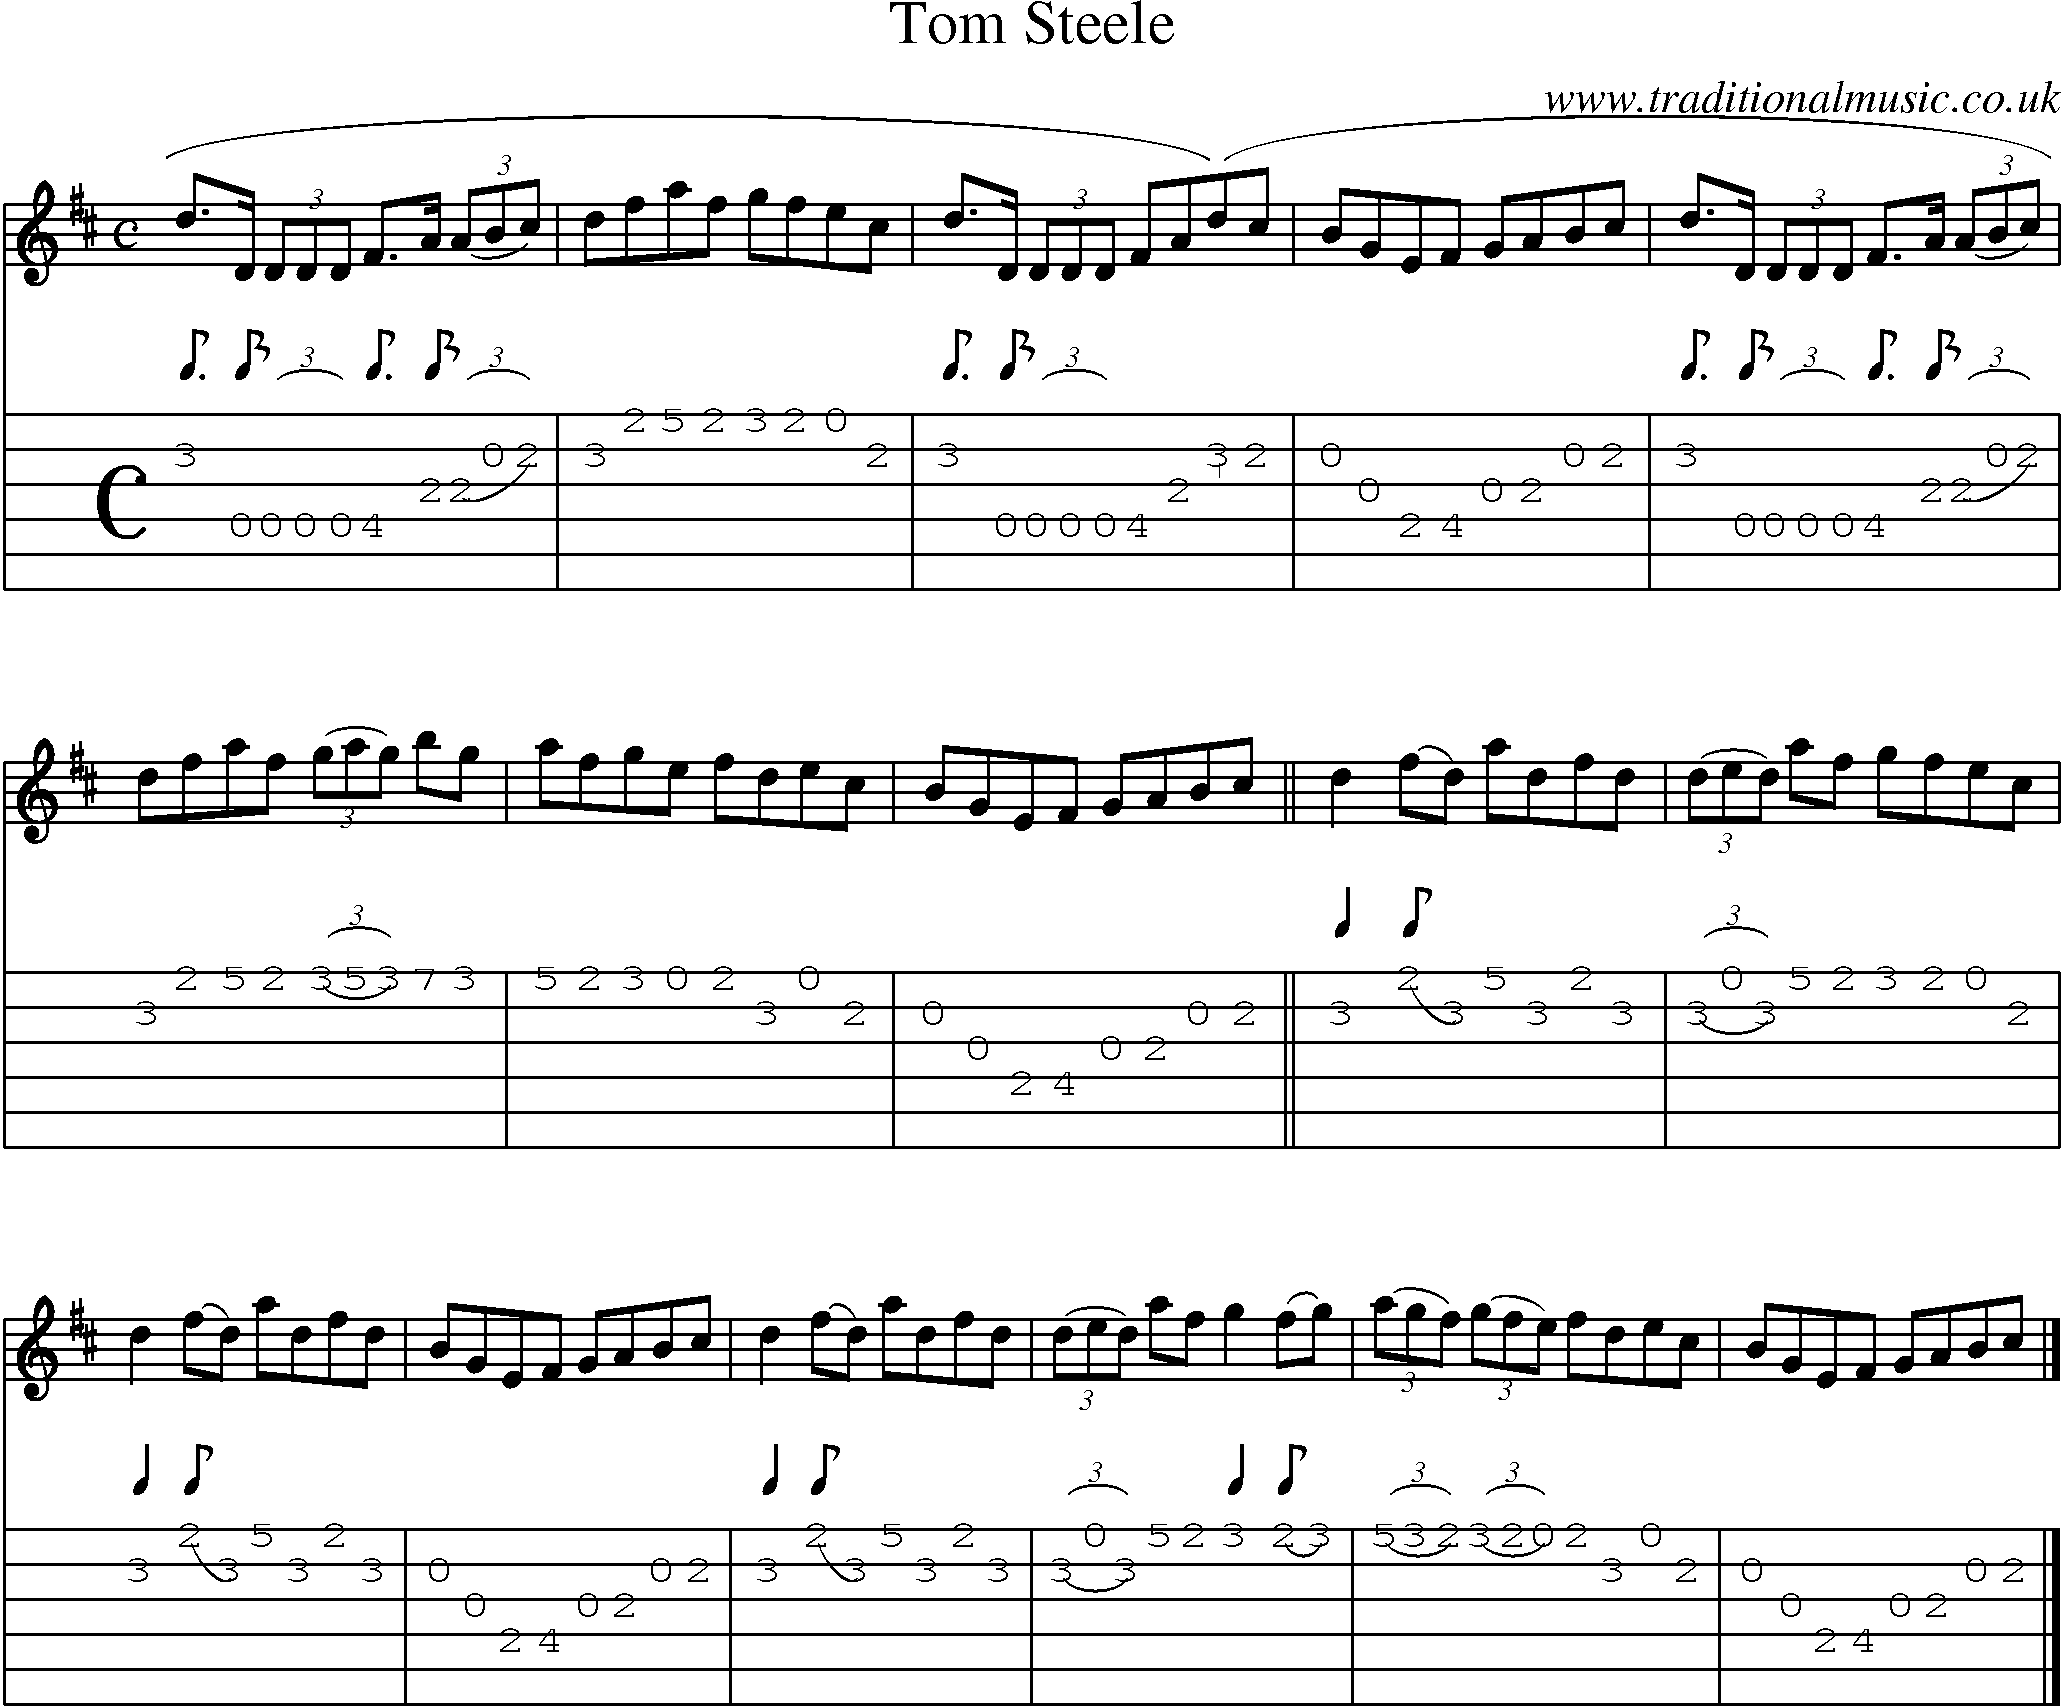 Music Score and Guitar Tabs for Tom Steele